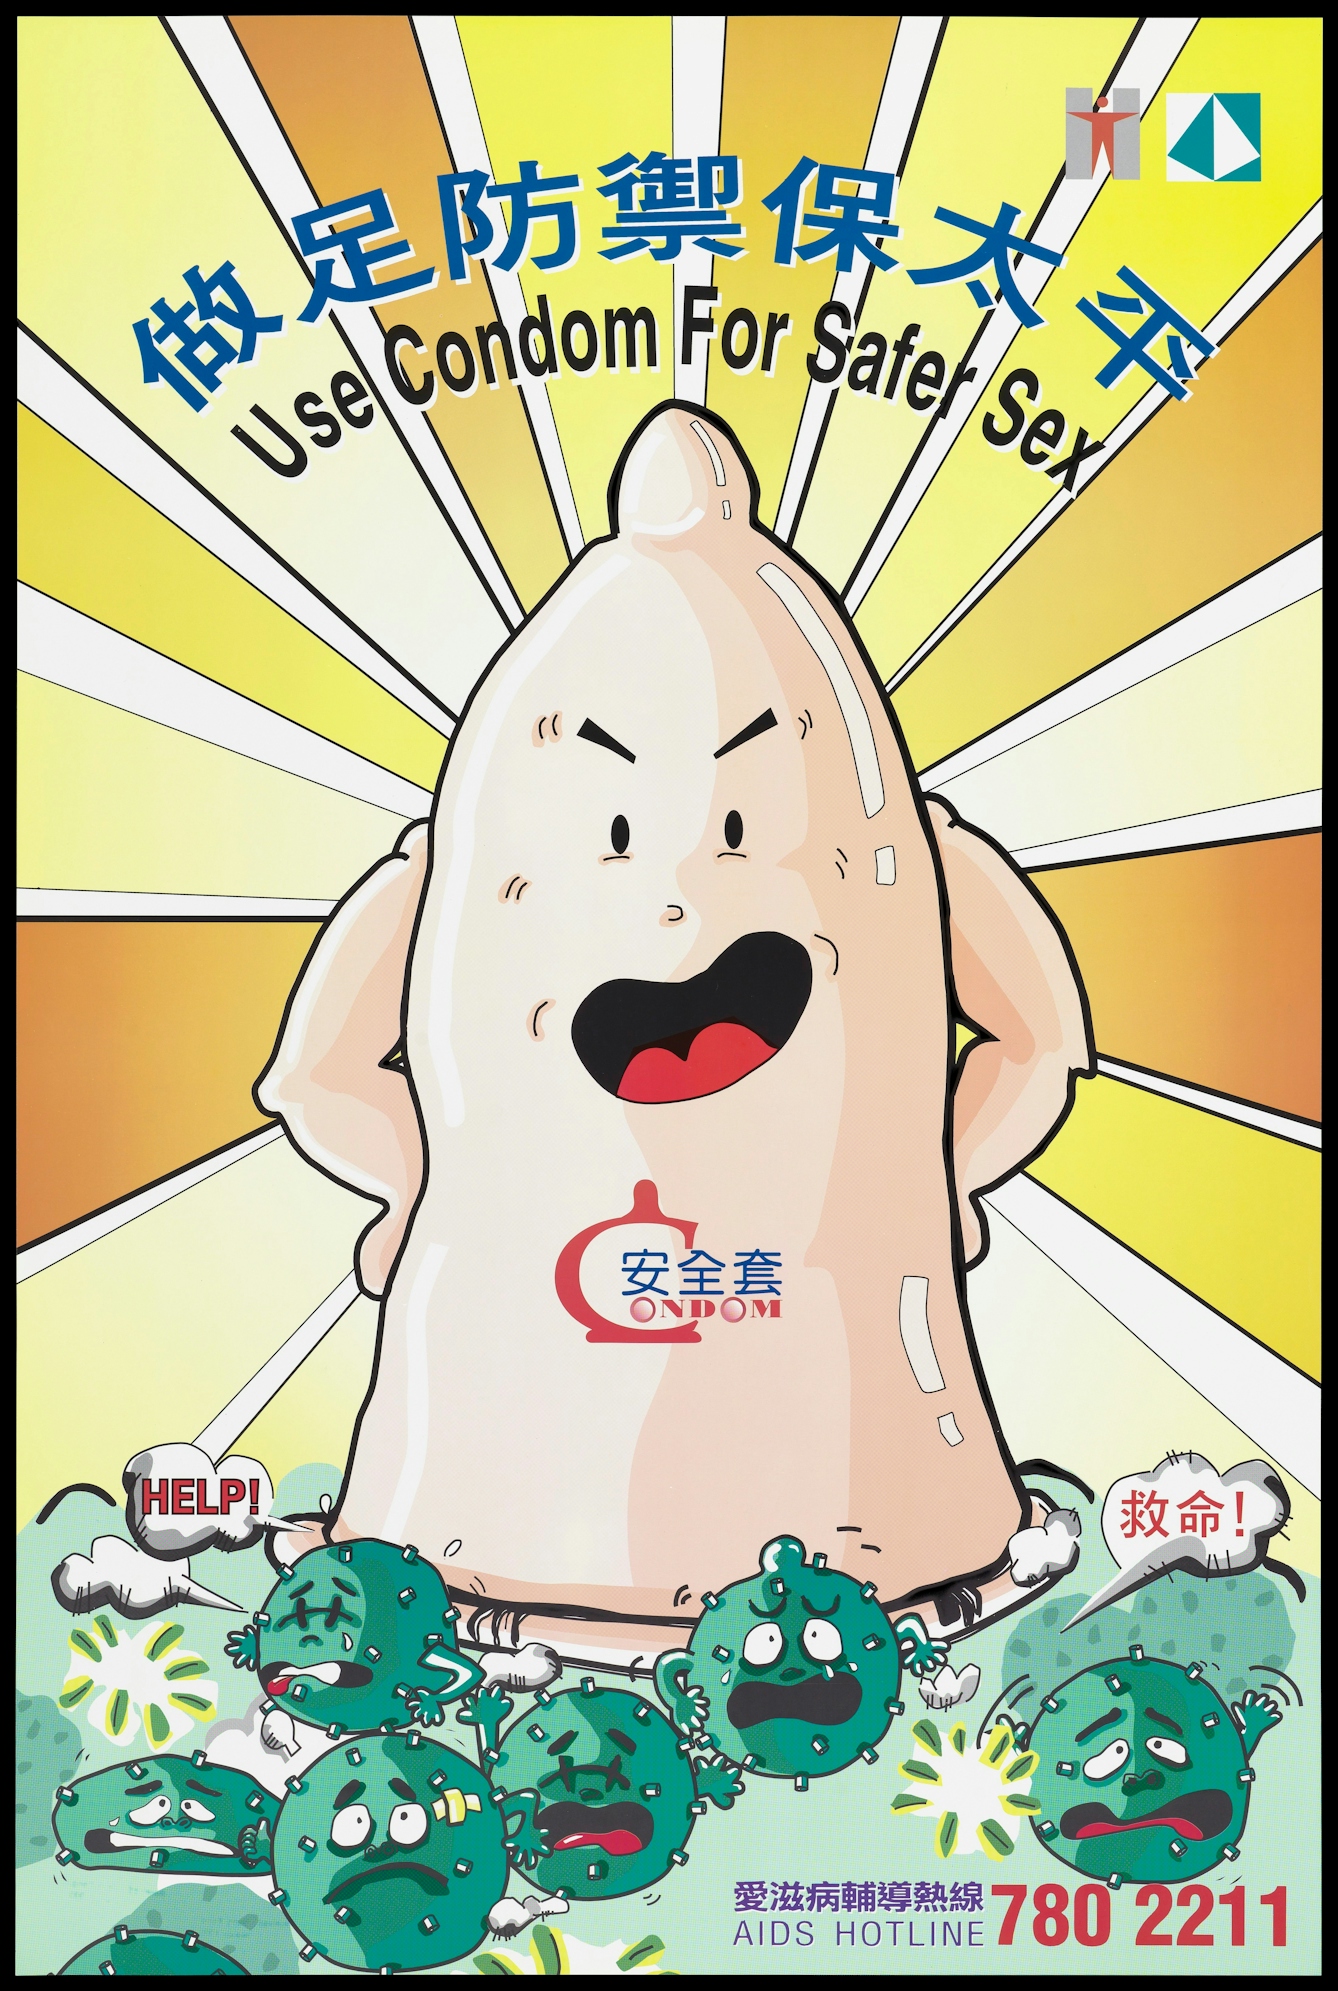 A large personified condom stands triumphantly on personified versions of the HIV virus who cry out for 'help'; with rays of sunshine in the background; a safe-sex advertisement by the AIDS Unit Department of Health, Government of Hong Kong. Colour lithograph, 1995.